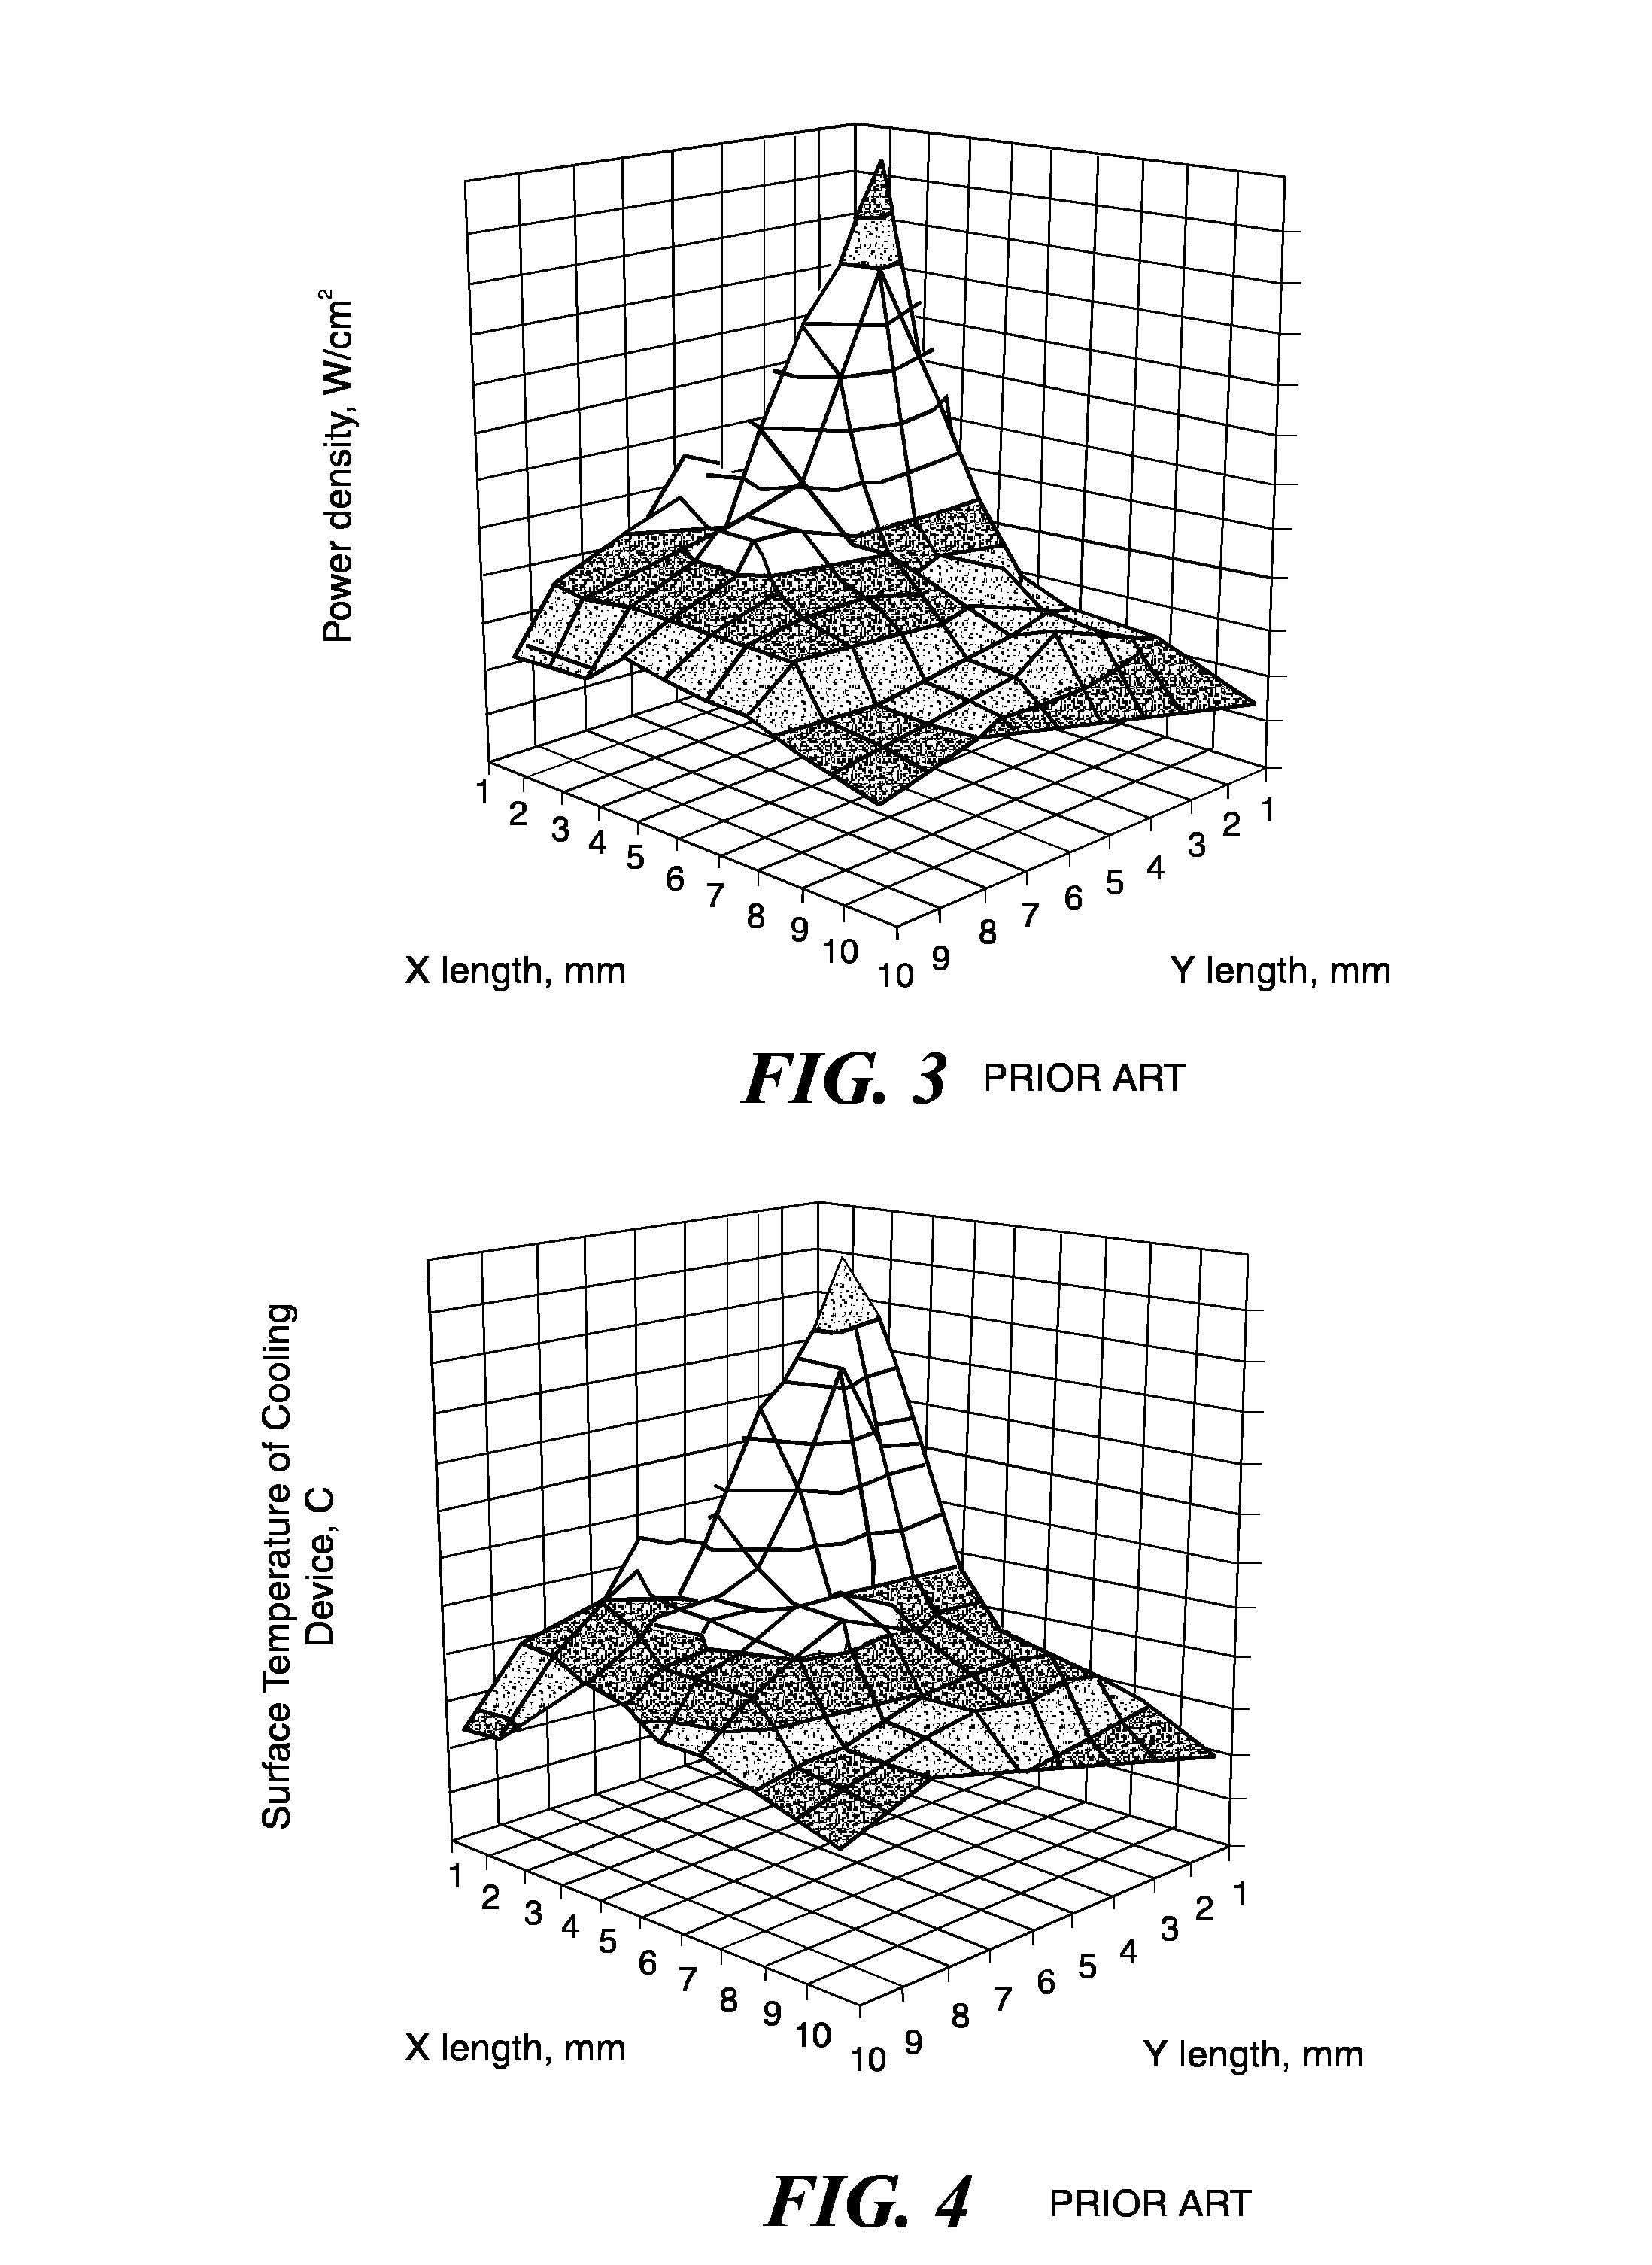 Apparatus for thermal characterization under non-uniform heat load